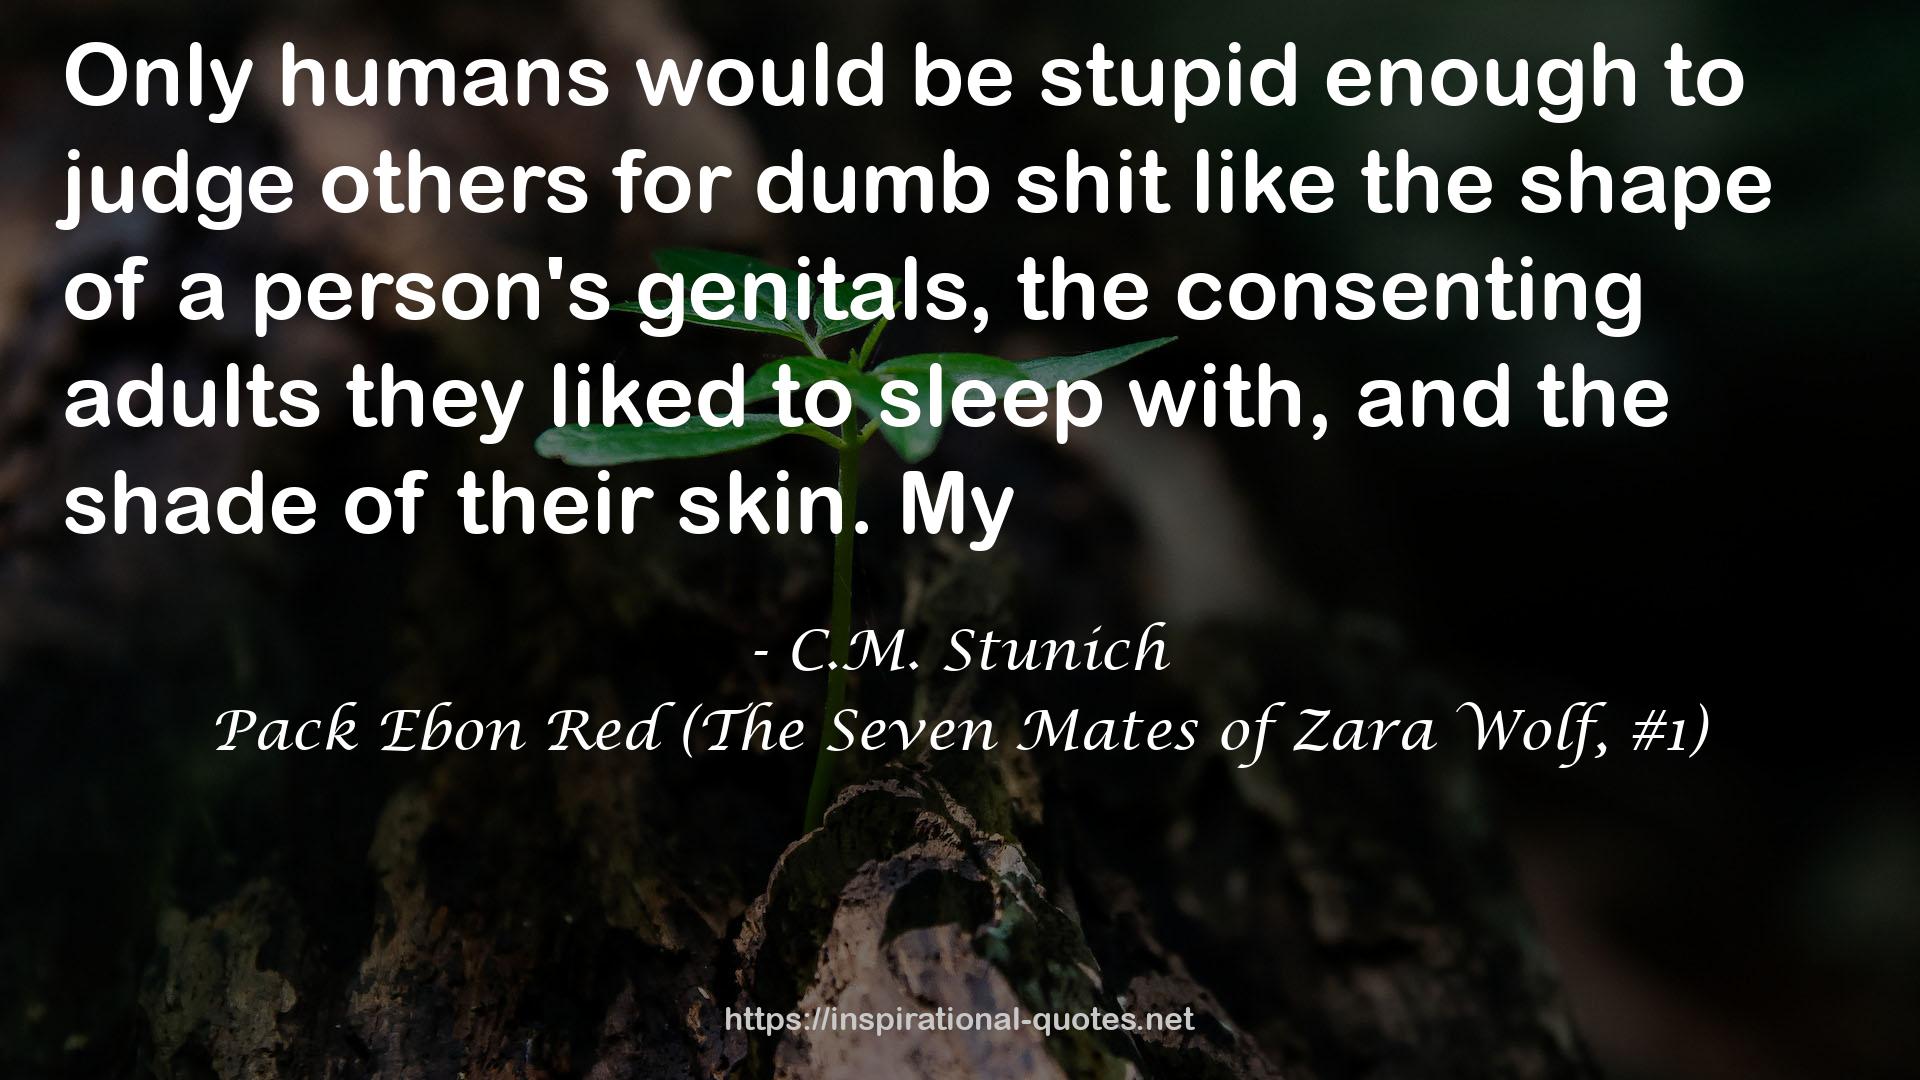 Pack Ebon Red (The Seven Mates of Zara Wolf, #1) QUOTES